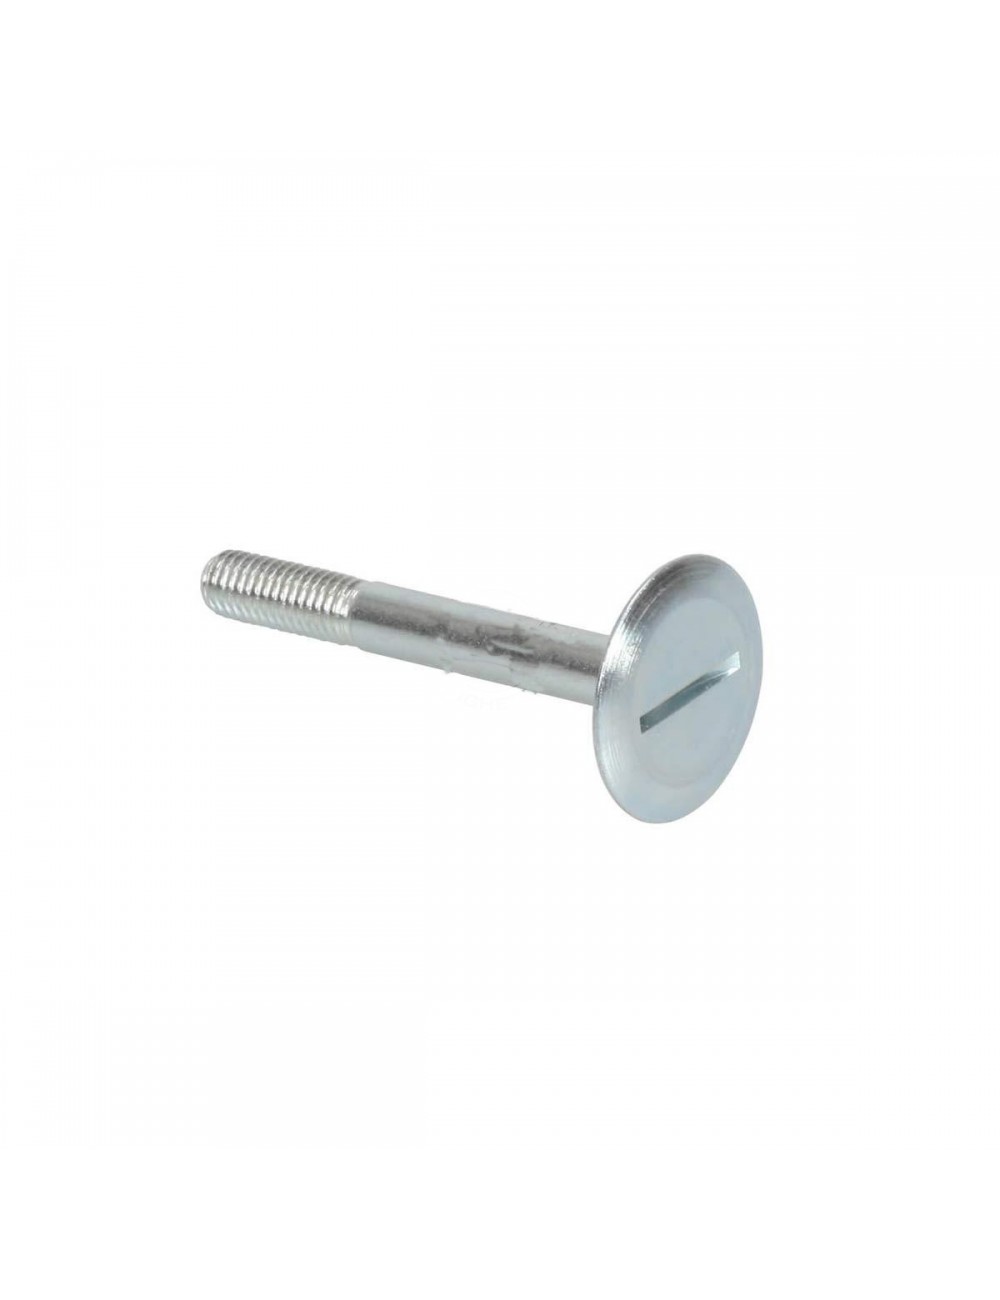 Screw for Seat M8x25mm. Head D.30mm H.2mm, machine product with rolling threat